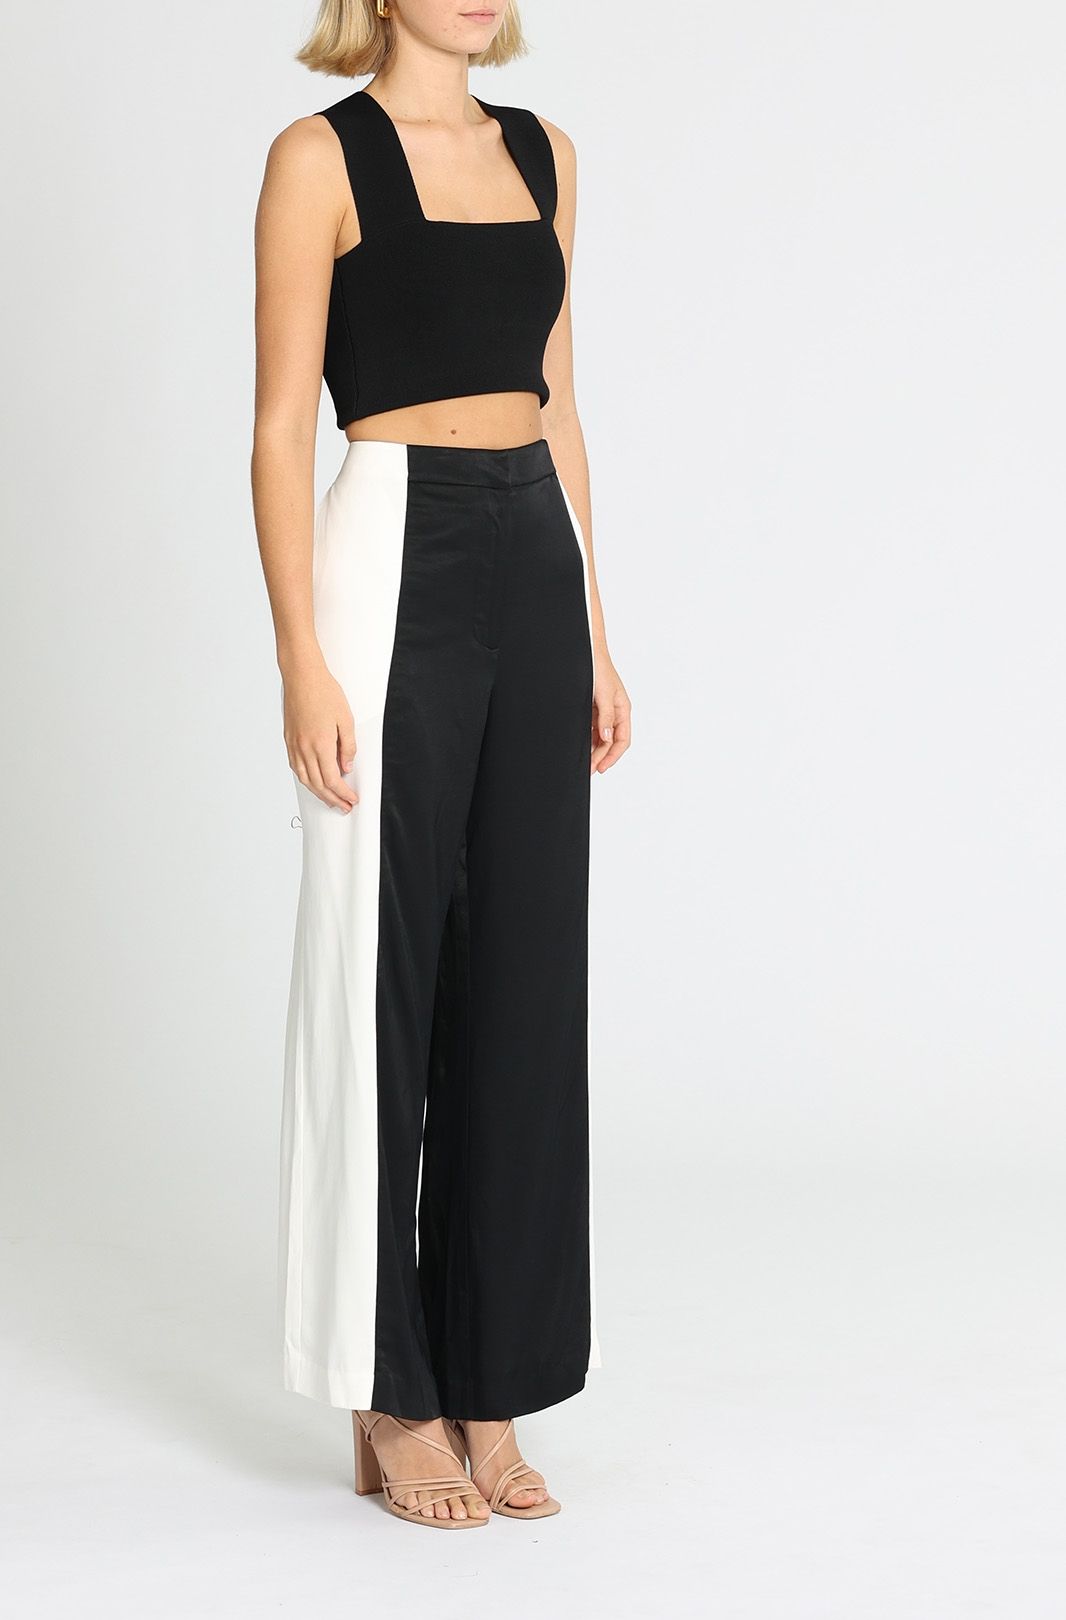 Sass and Bide - Black and White Pants Colour Block